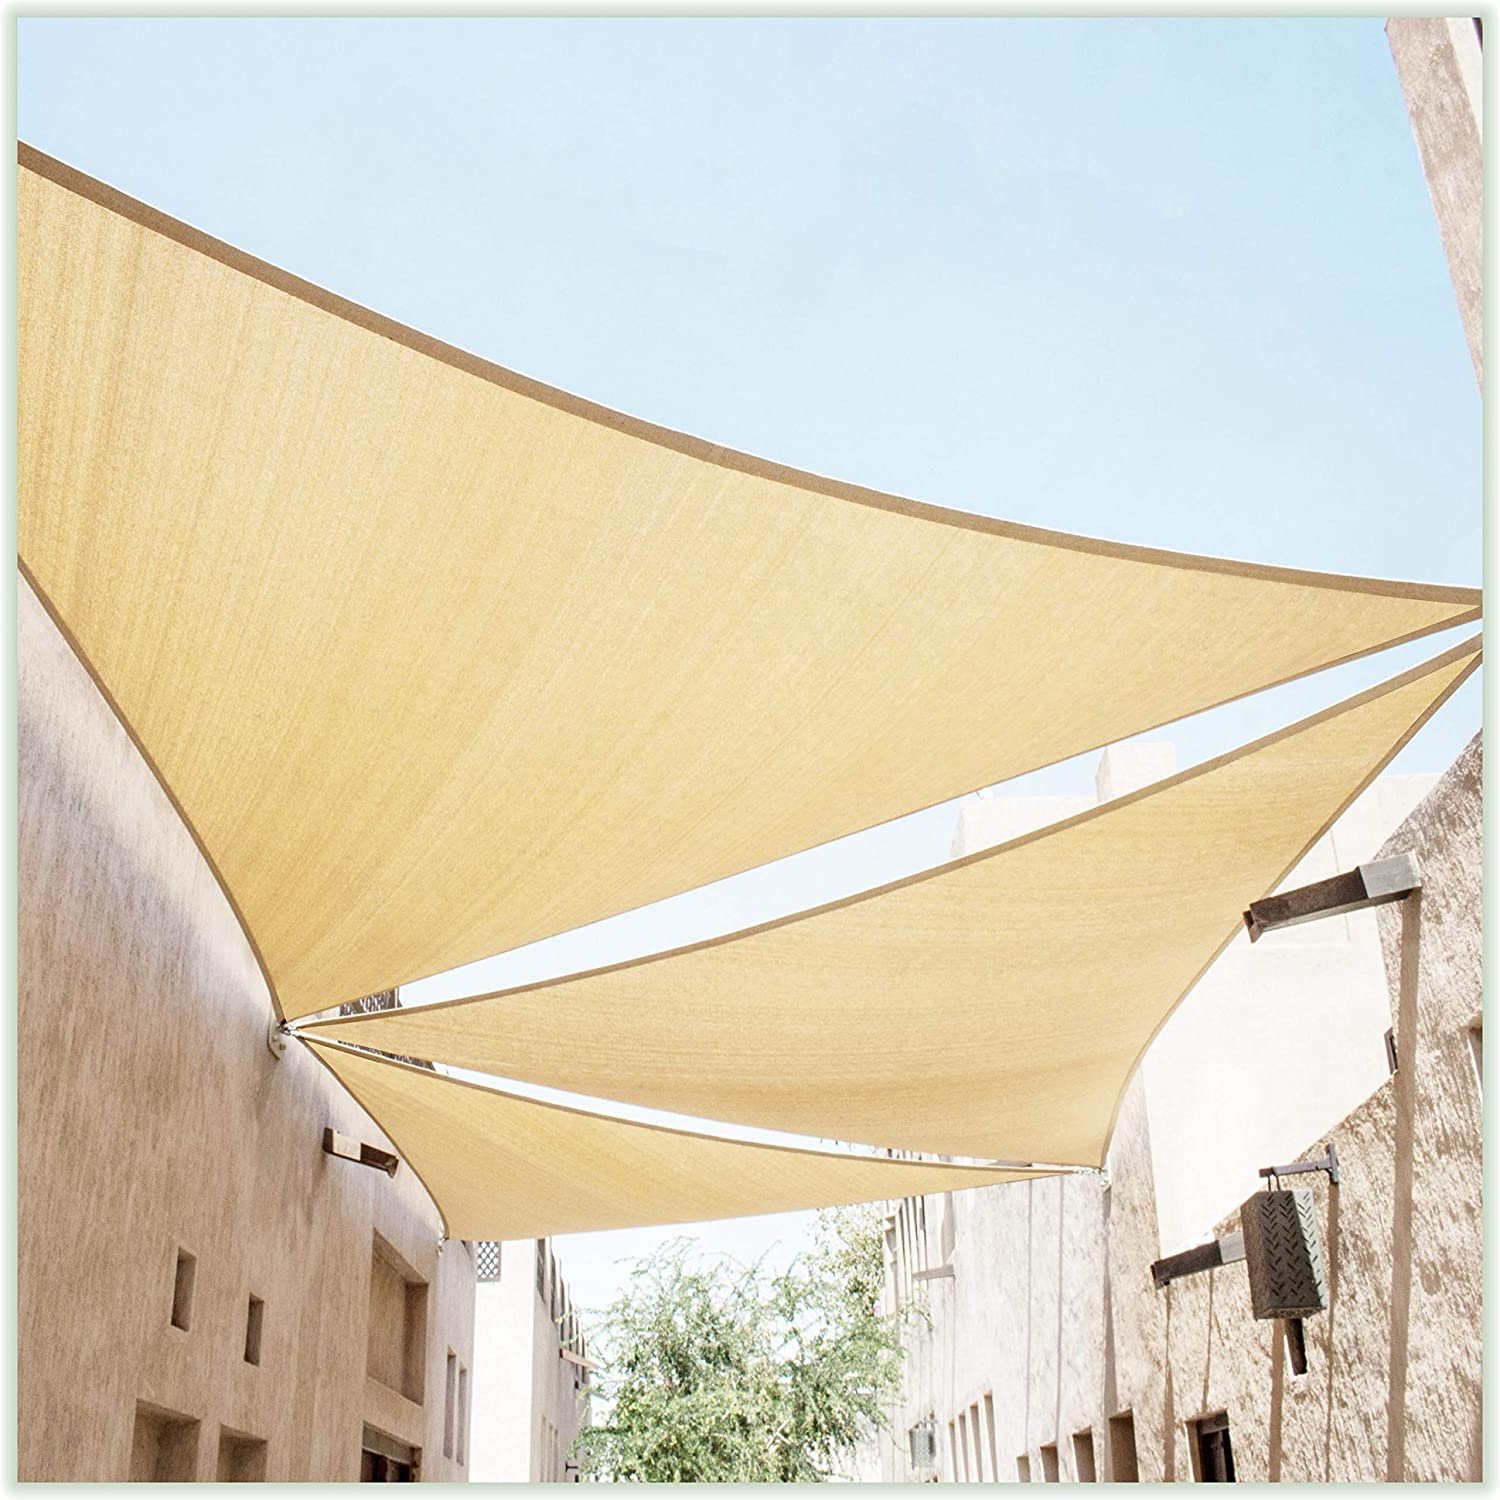 16' Triangle Shade Sail by Colour Tree